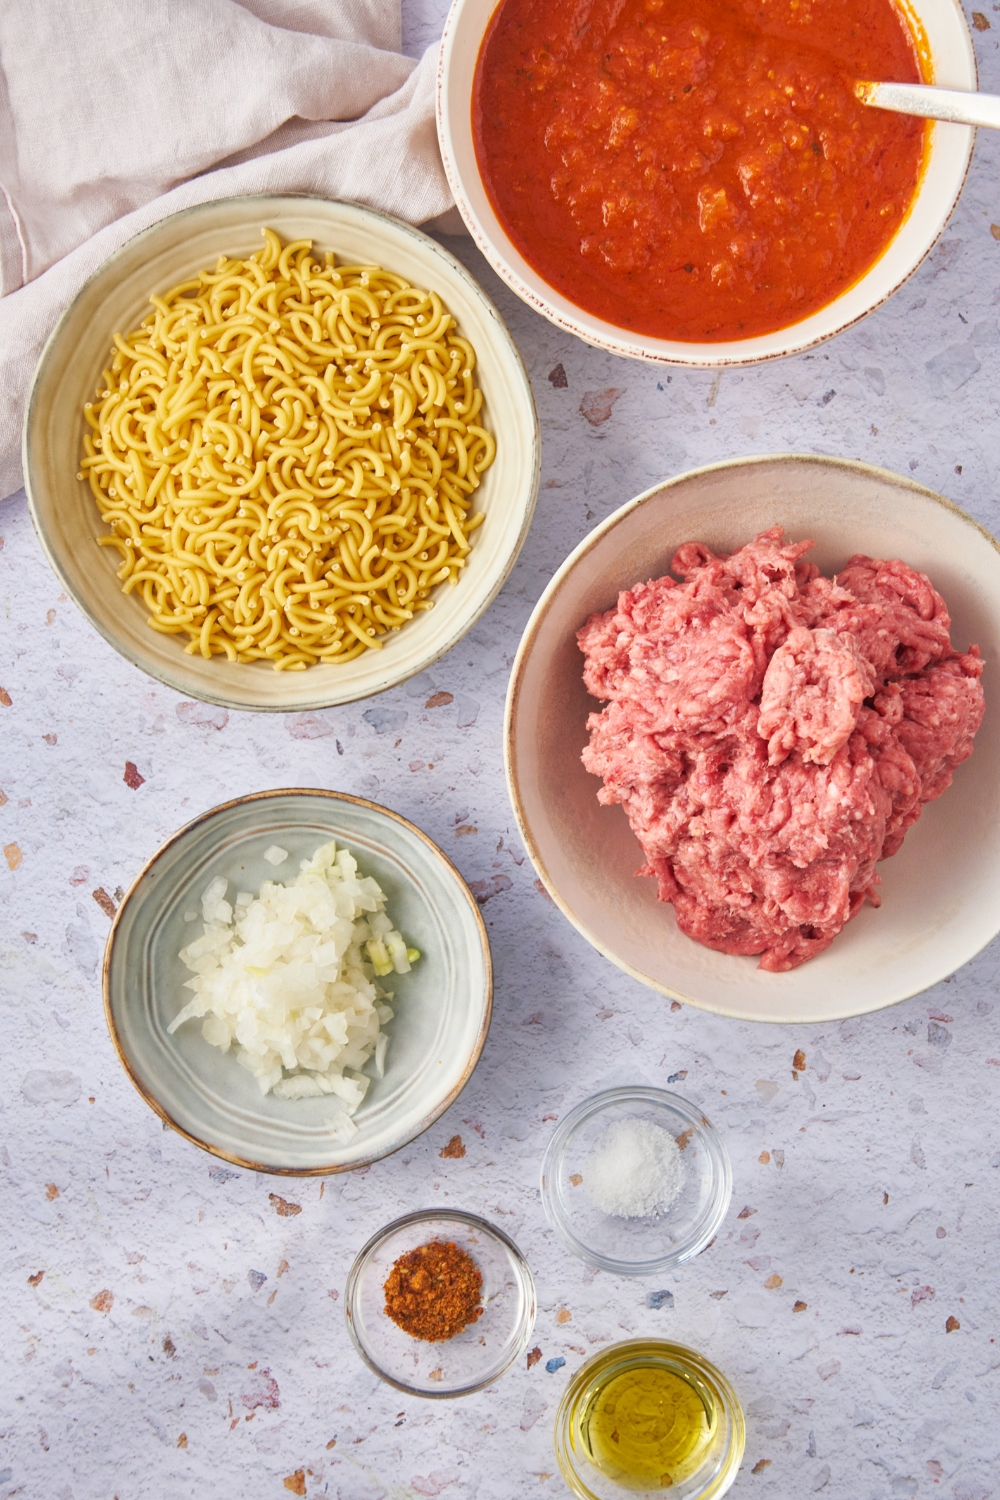 Overhead view of an assortment of ingredients including bowls of raw ground beef, tomato sauce, dried macaroni noodles, diced onion, oil, salt, and spices.